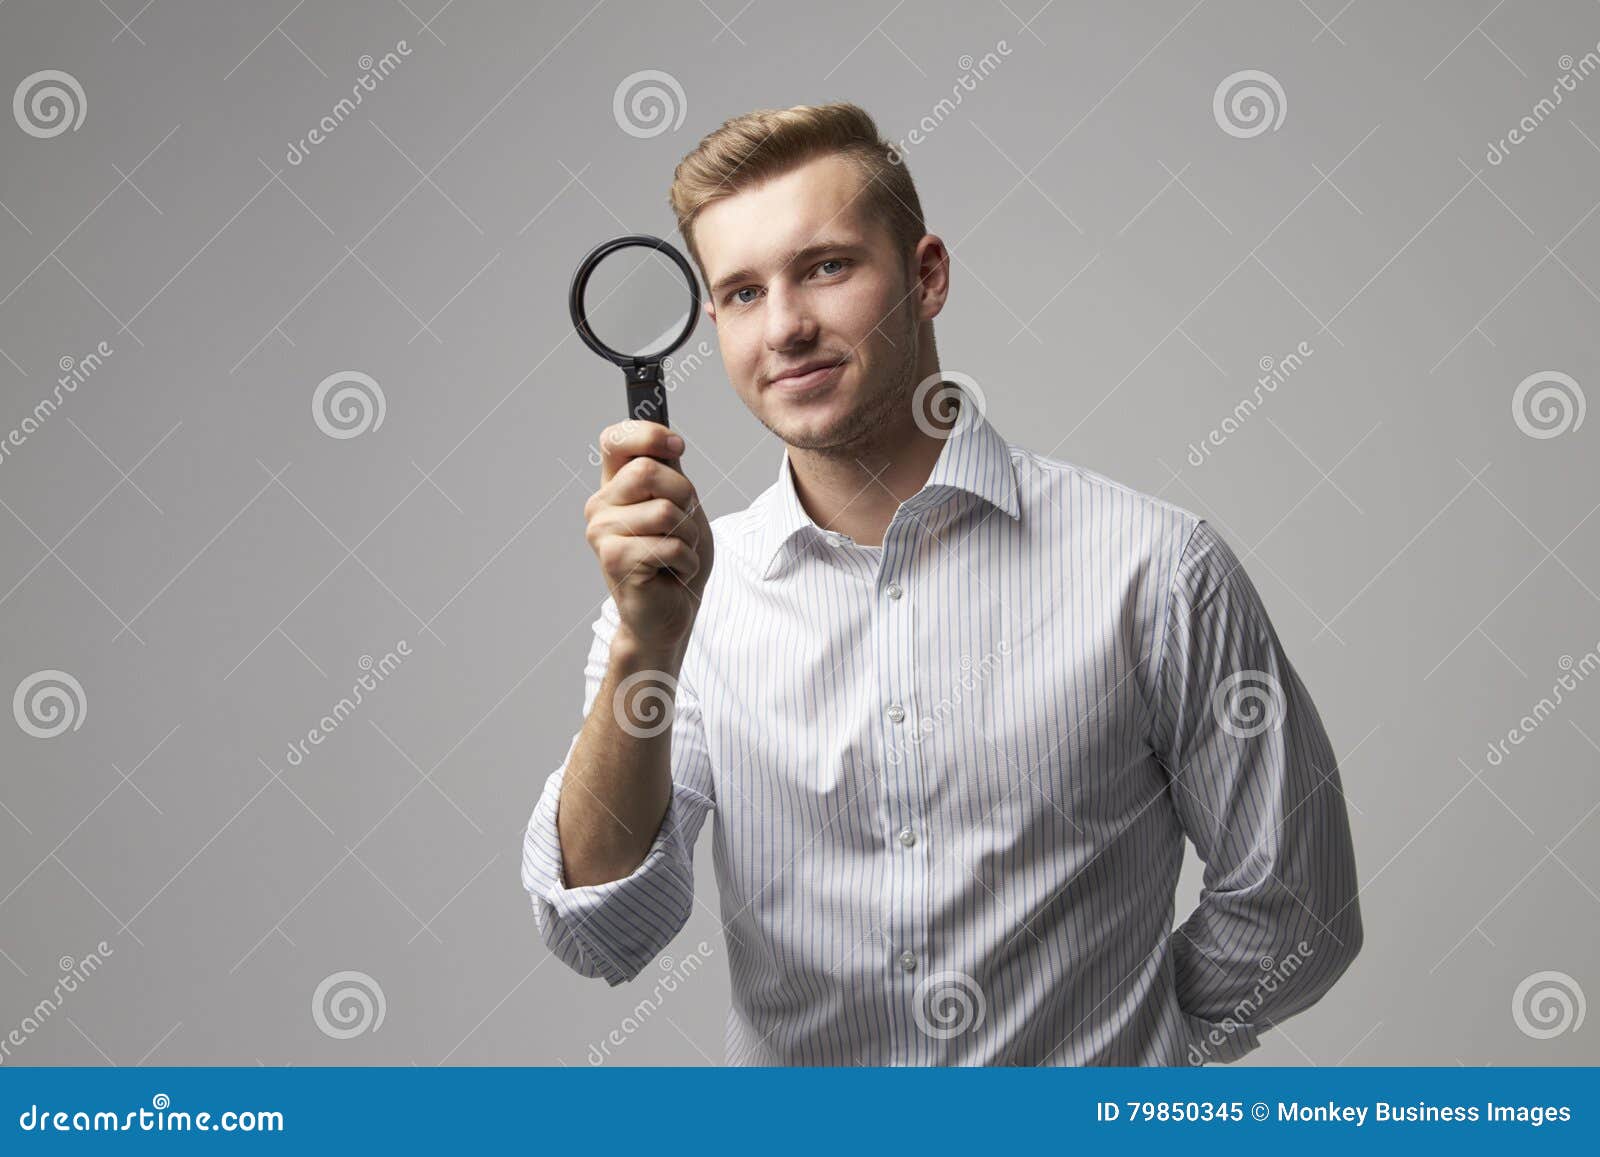 portrait of male criminologist with magnifying glass